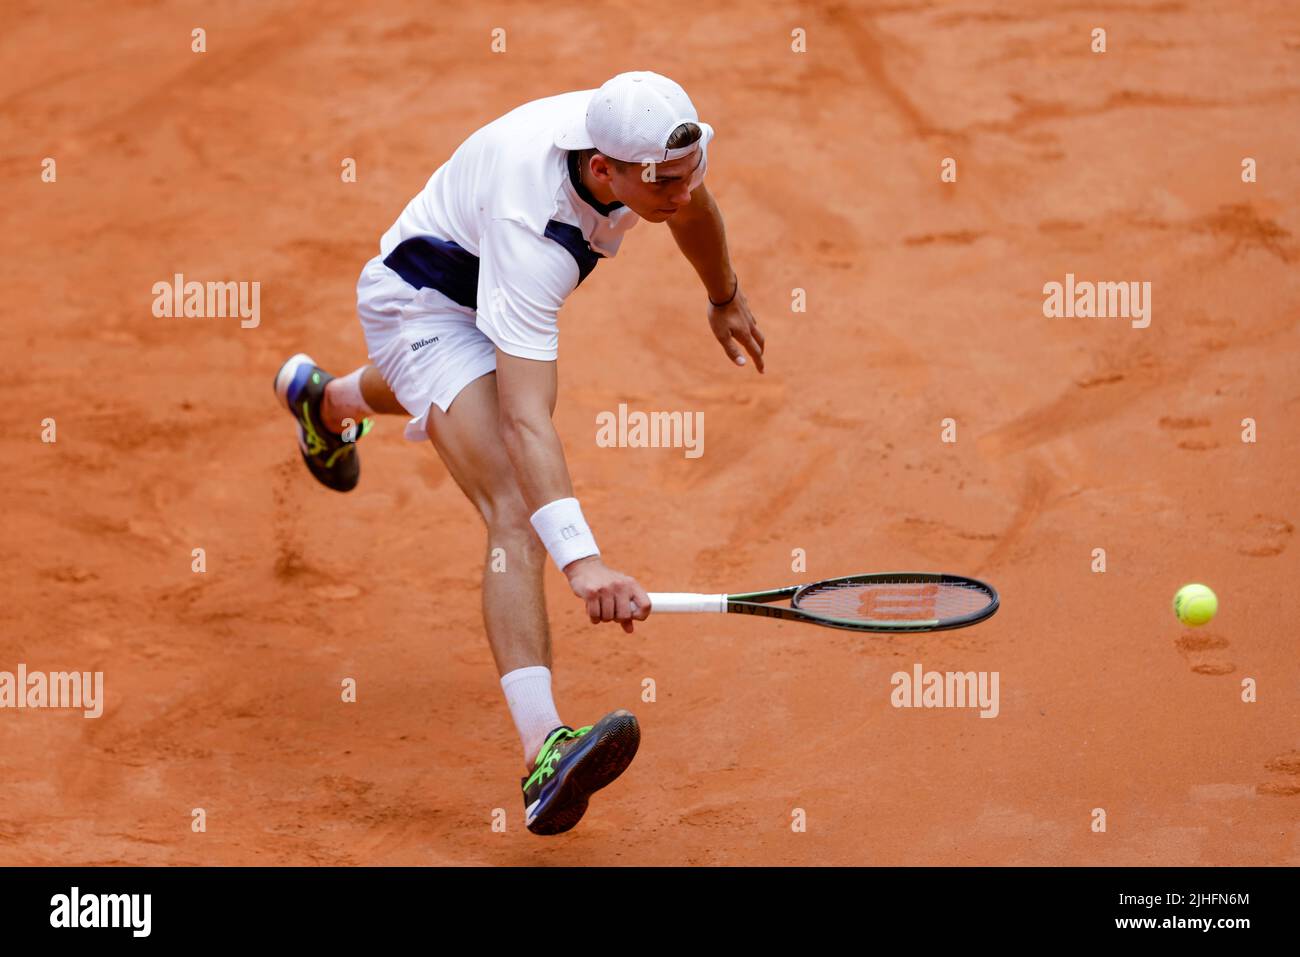 Hamburg, Germany. 18th July, 2022. Tennis: WTA Tour/ATP Tour, Singles, Men,  1st round. Topo (Germany) - Molcan (Slovakia). Marko Topo is in action.  Credit: Frank Molter/dpa/Alamy Live News Stock Photo - Alamy